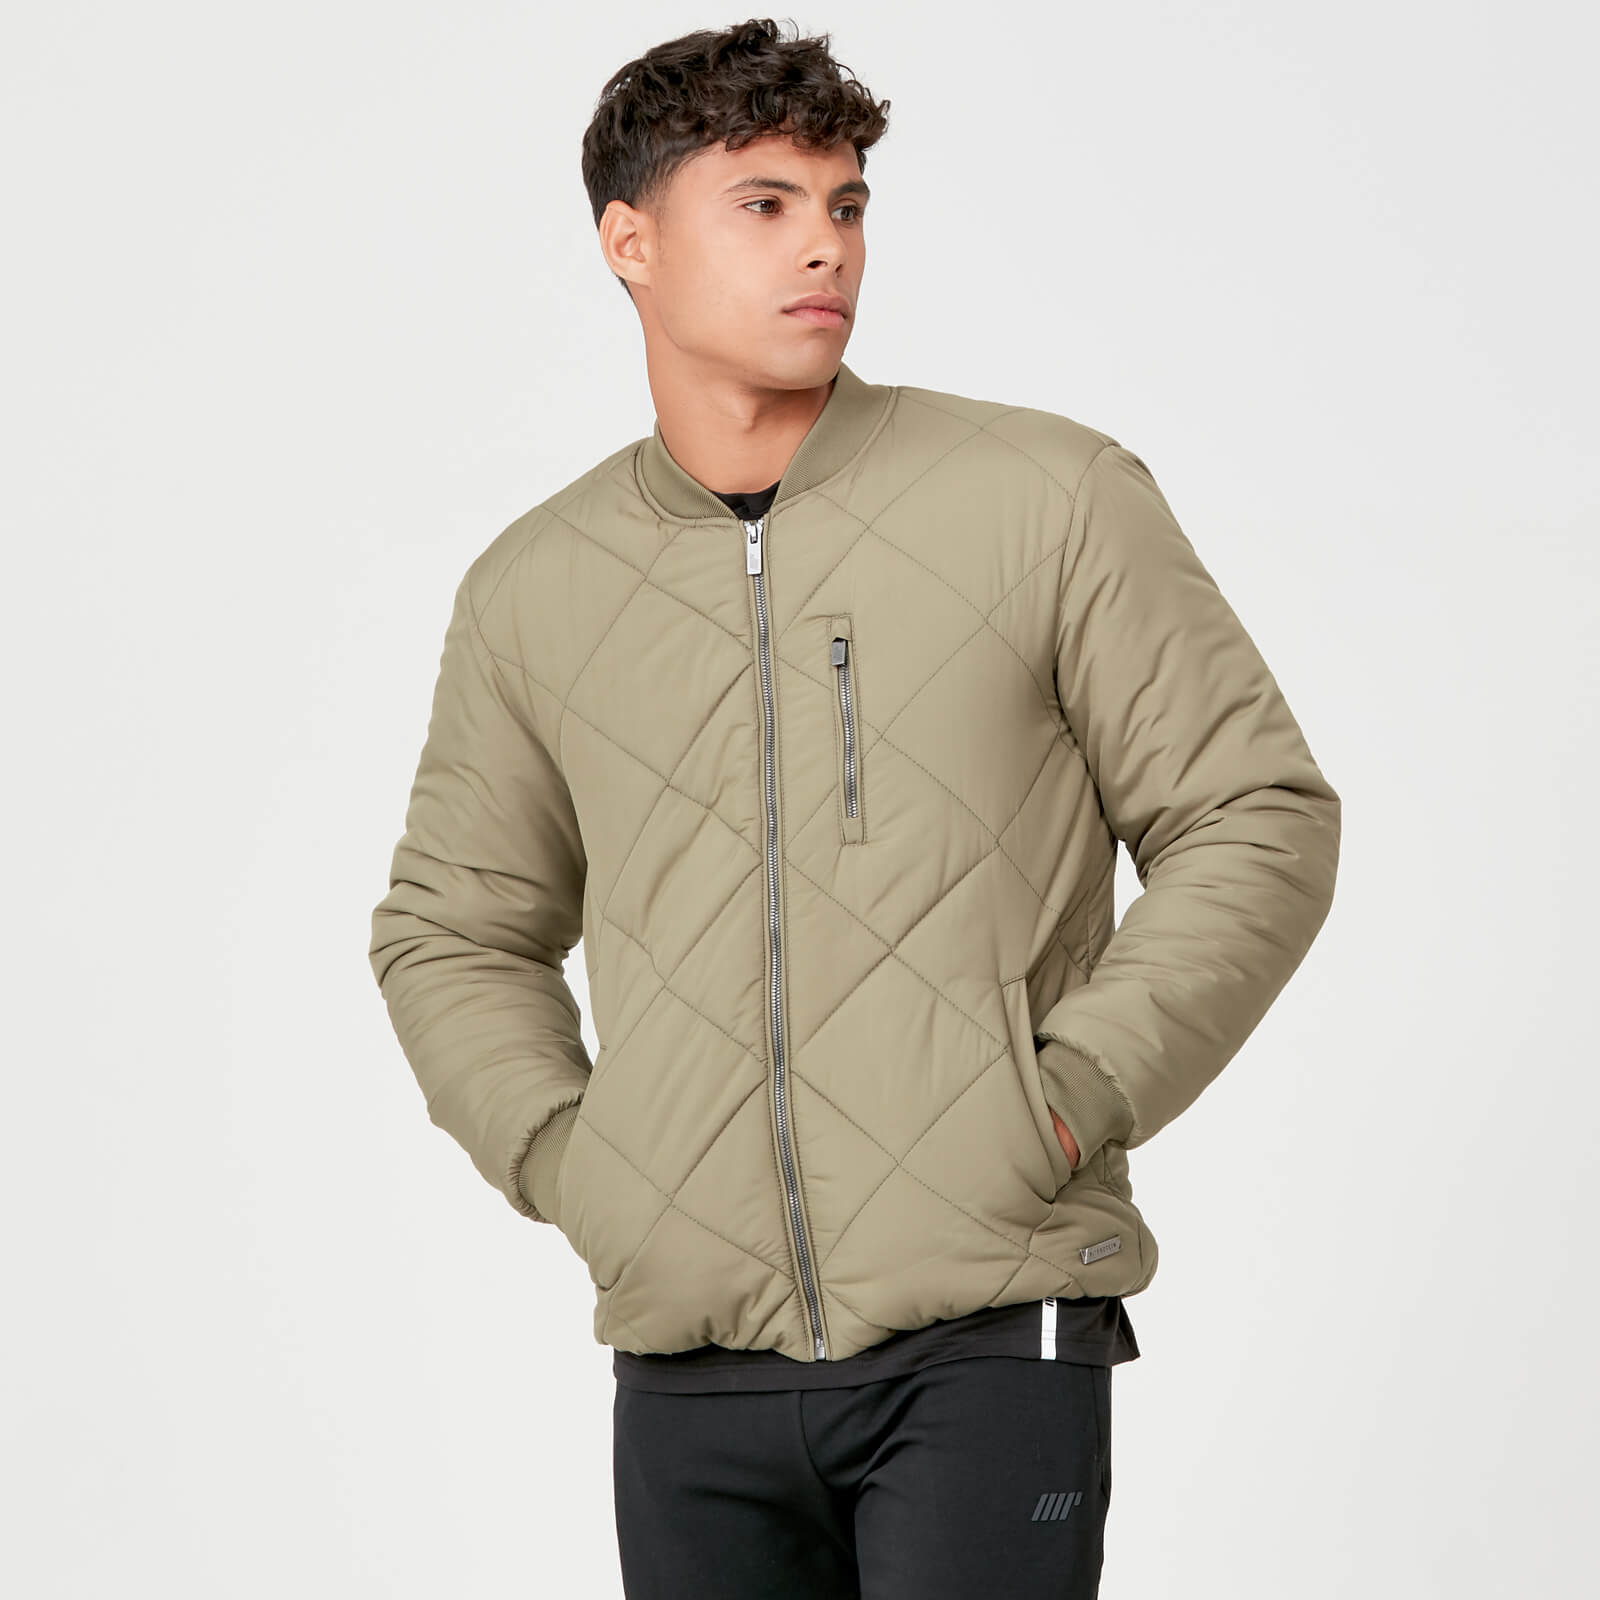 Pro-Tech Quilted bomber jakna - Maslinasta - XS